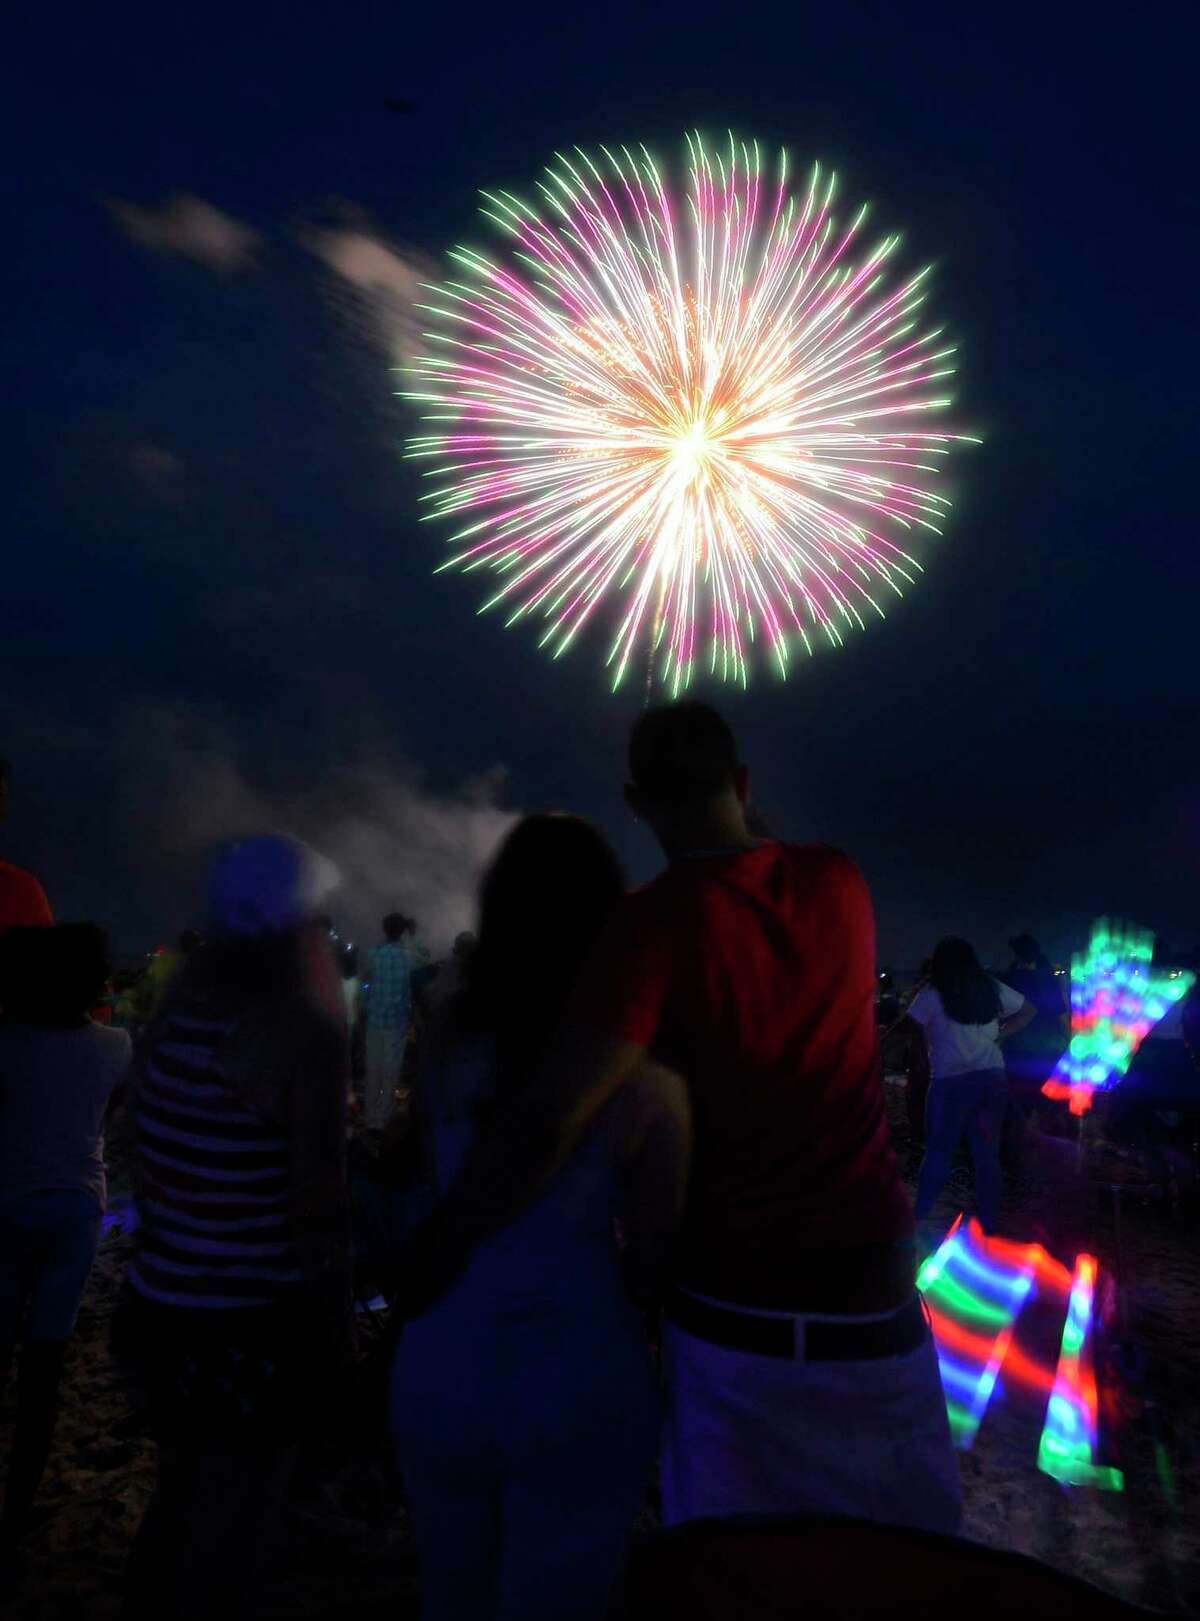 A fireworks spectacular lights up the skies over Cummings Park and Beach on Thursday, June 30, 2017 in Stamford, Connecticut. Several thousand residents weather a passing storm to take in the 20 minute show, enjoying a musical tribute, as they kick off their holiday weekend.